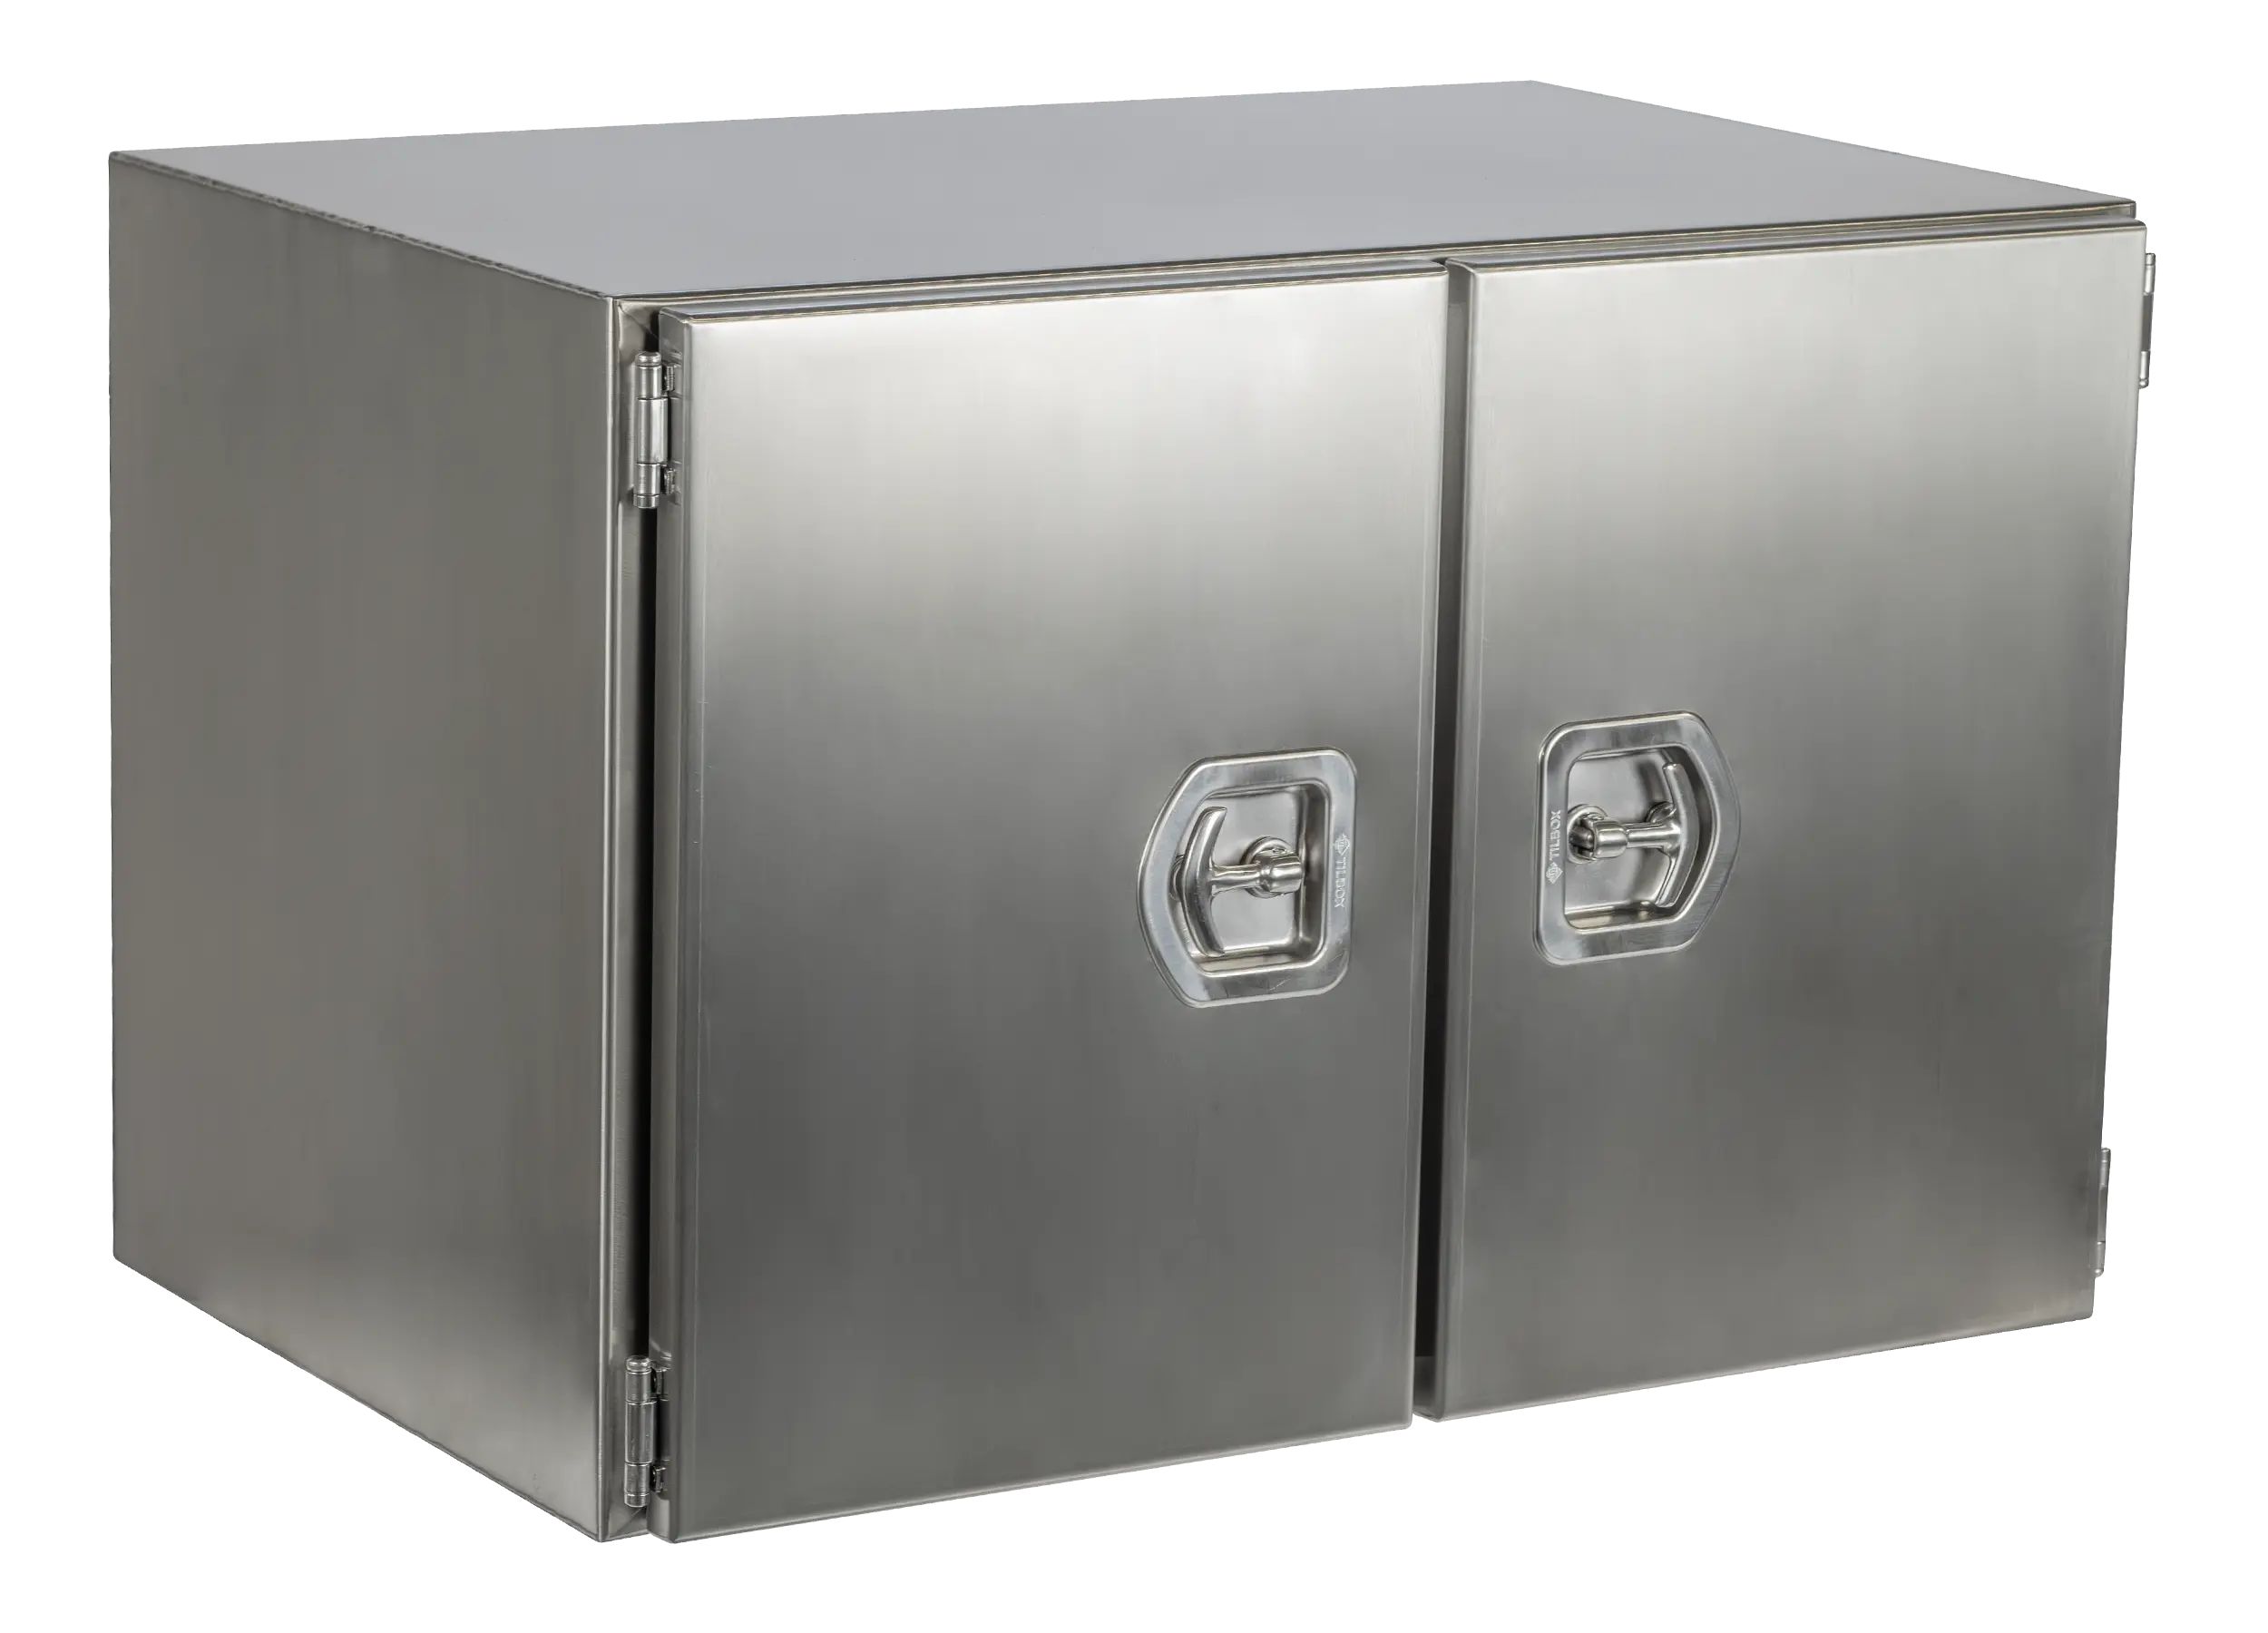 Toolbox - Stainless Steel - Double doors - 1200x600x600 mm